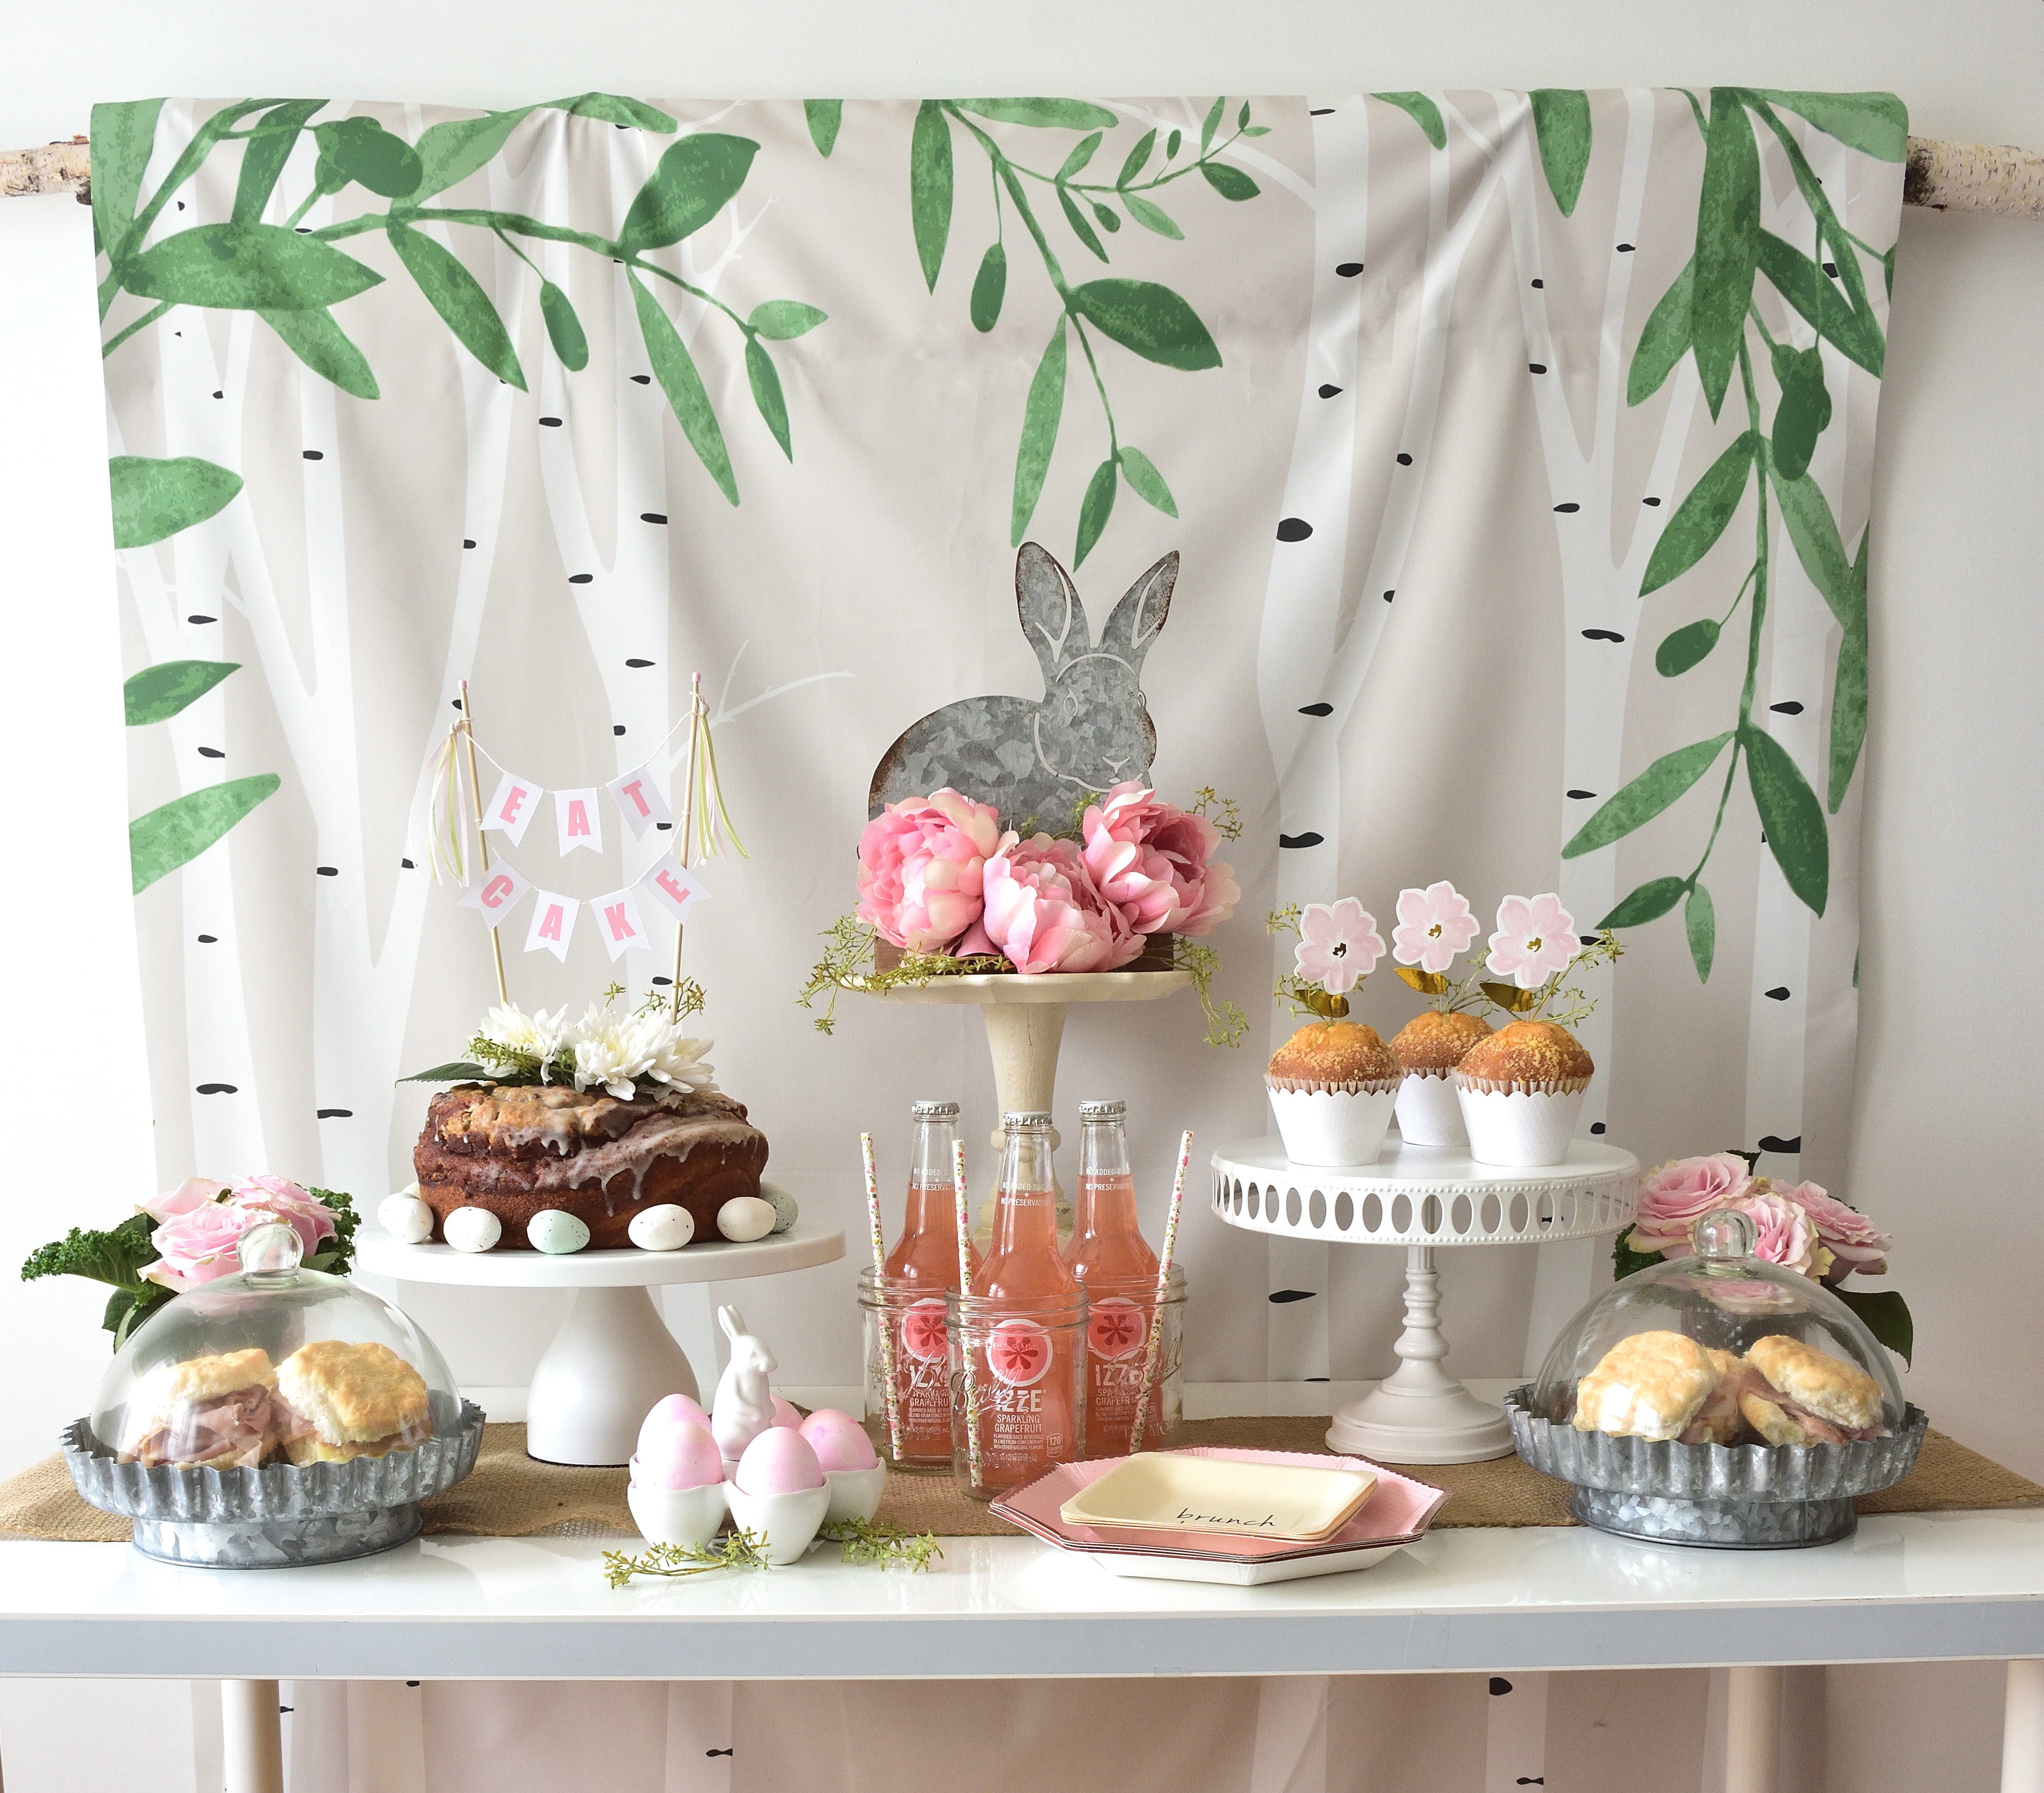 How to Decorate for an Easter Brunch